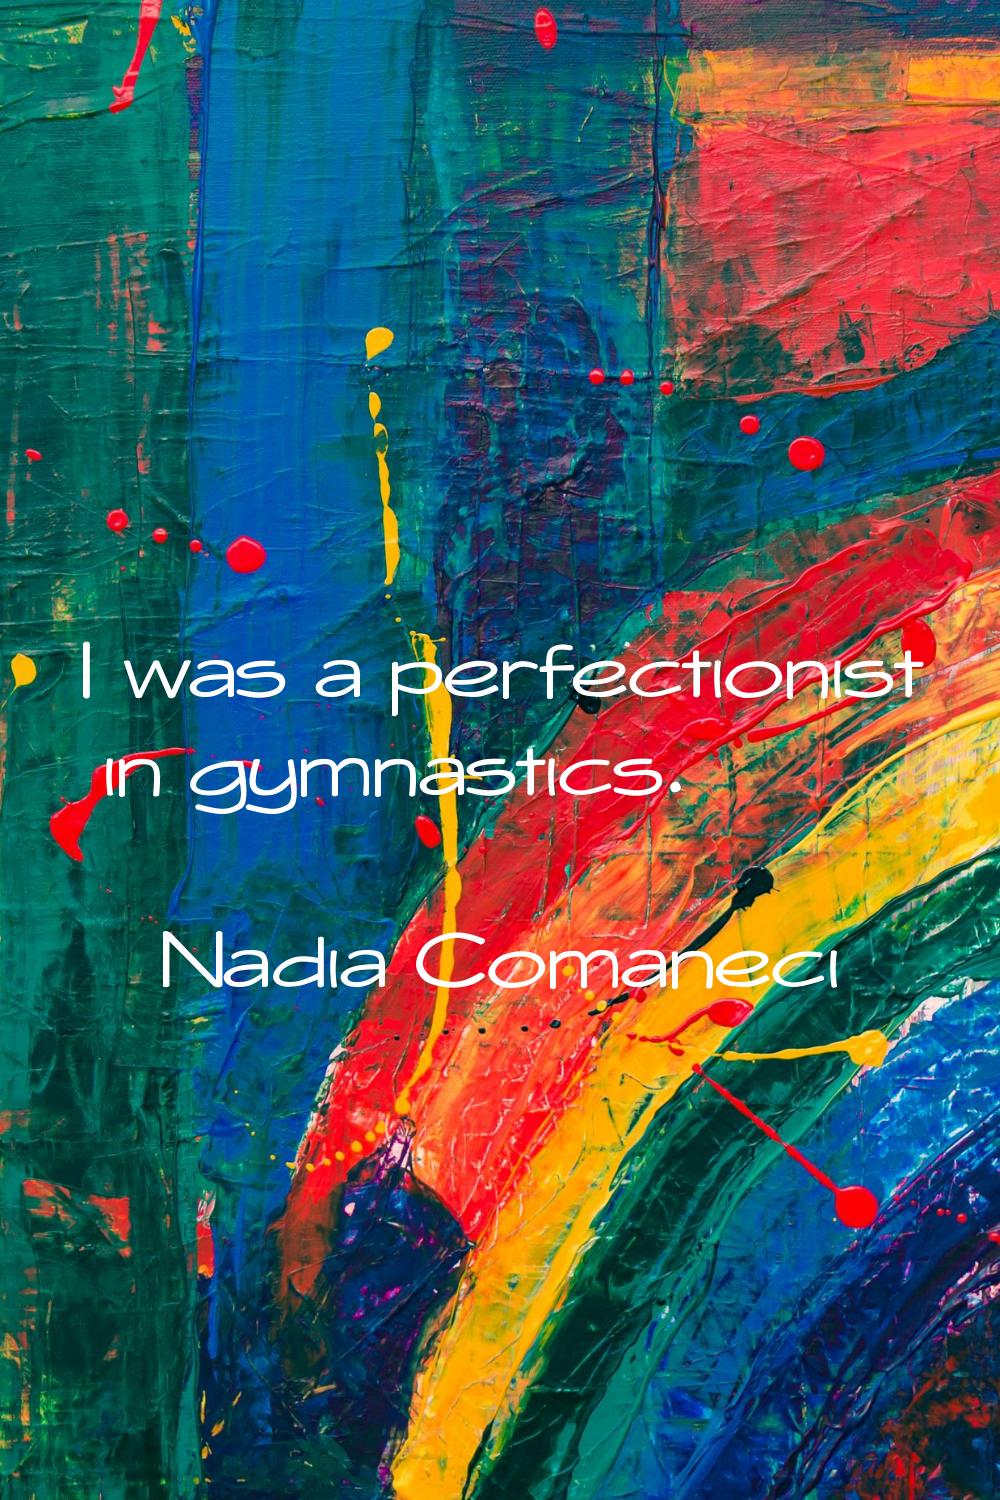 I was a perfectionist in gymnastics.